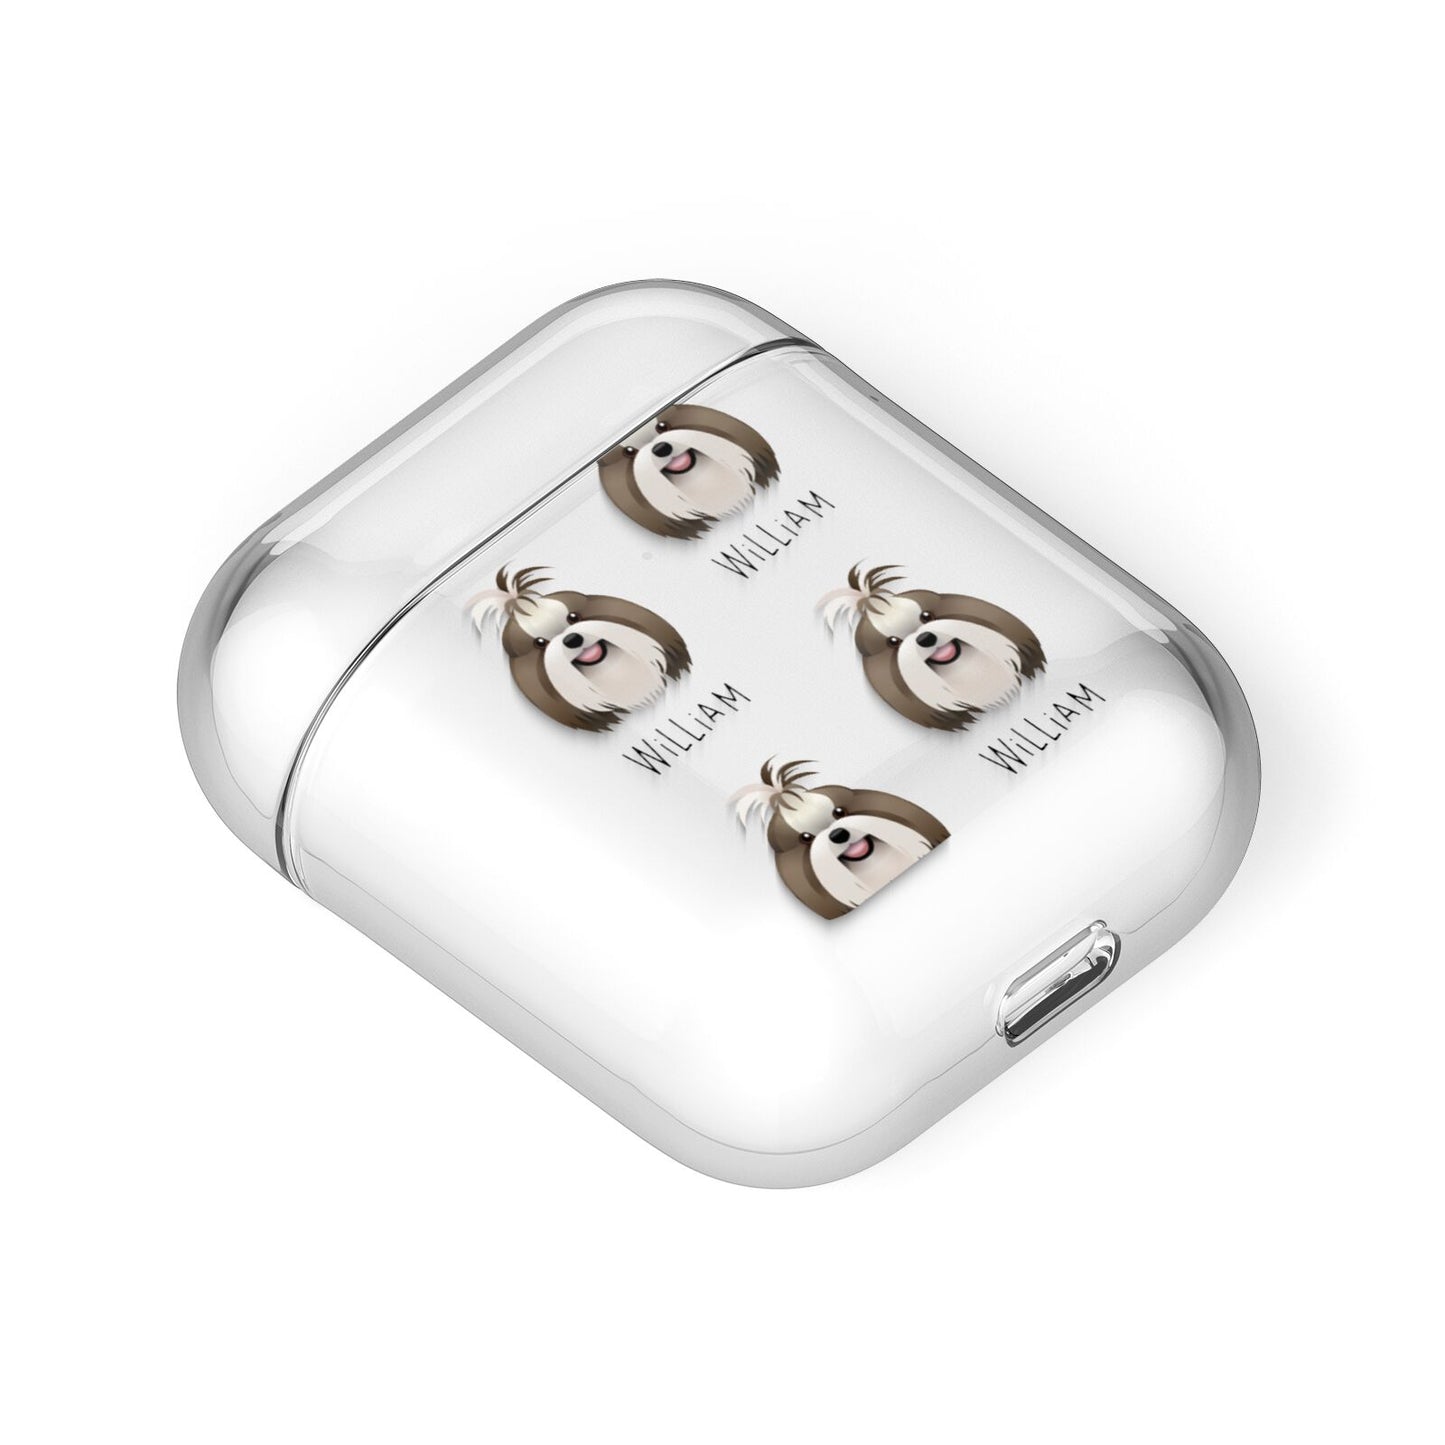 Shih Tzu Icon with Name AirPods Case Laid Flat